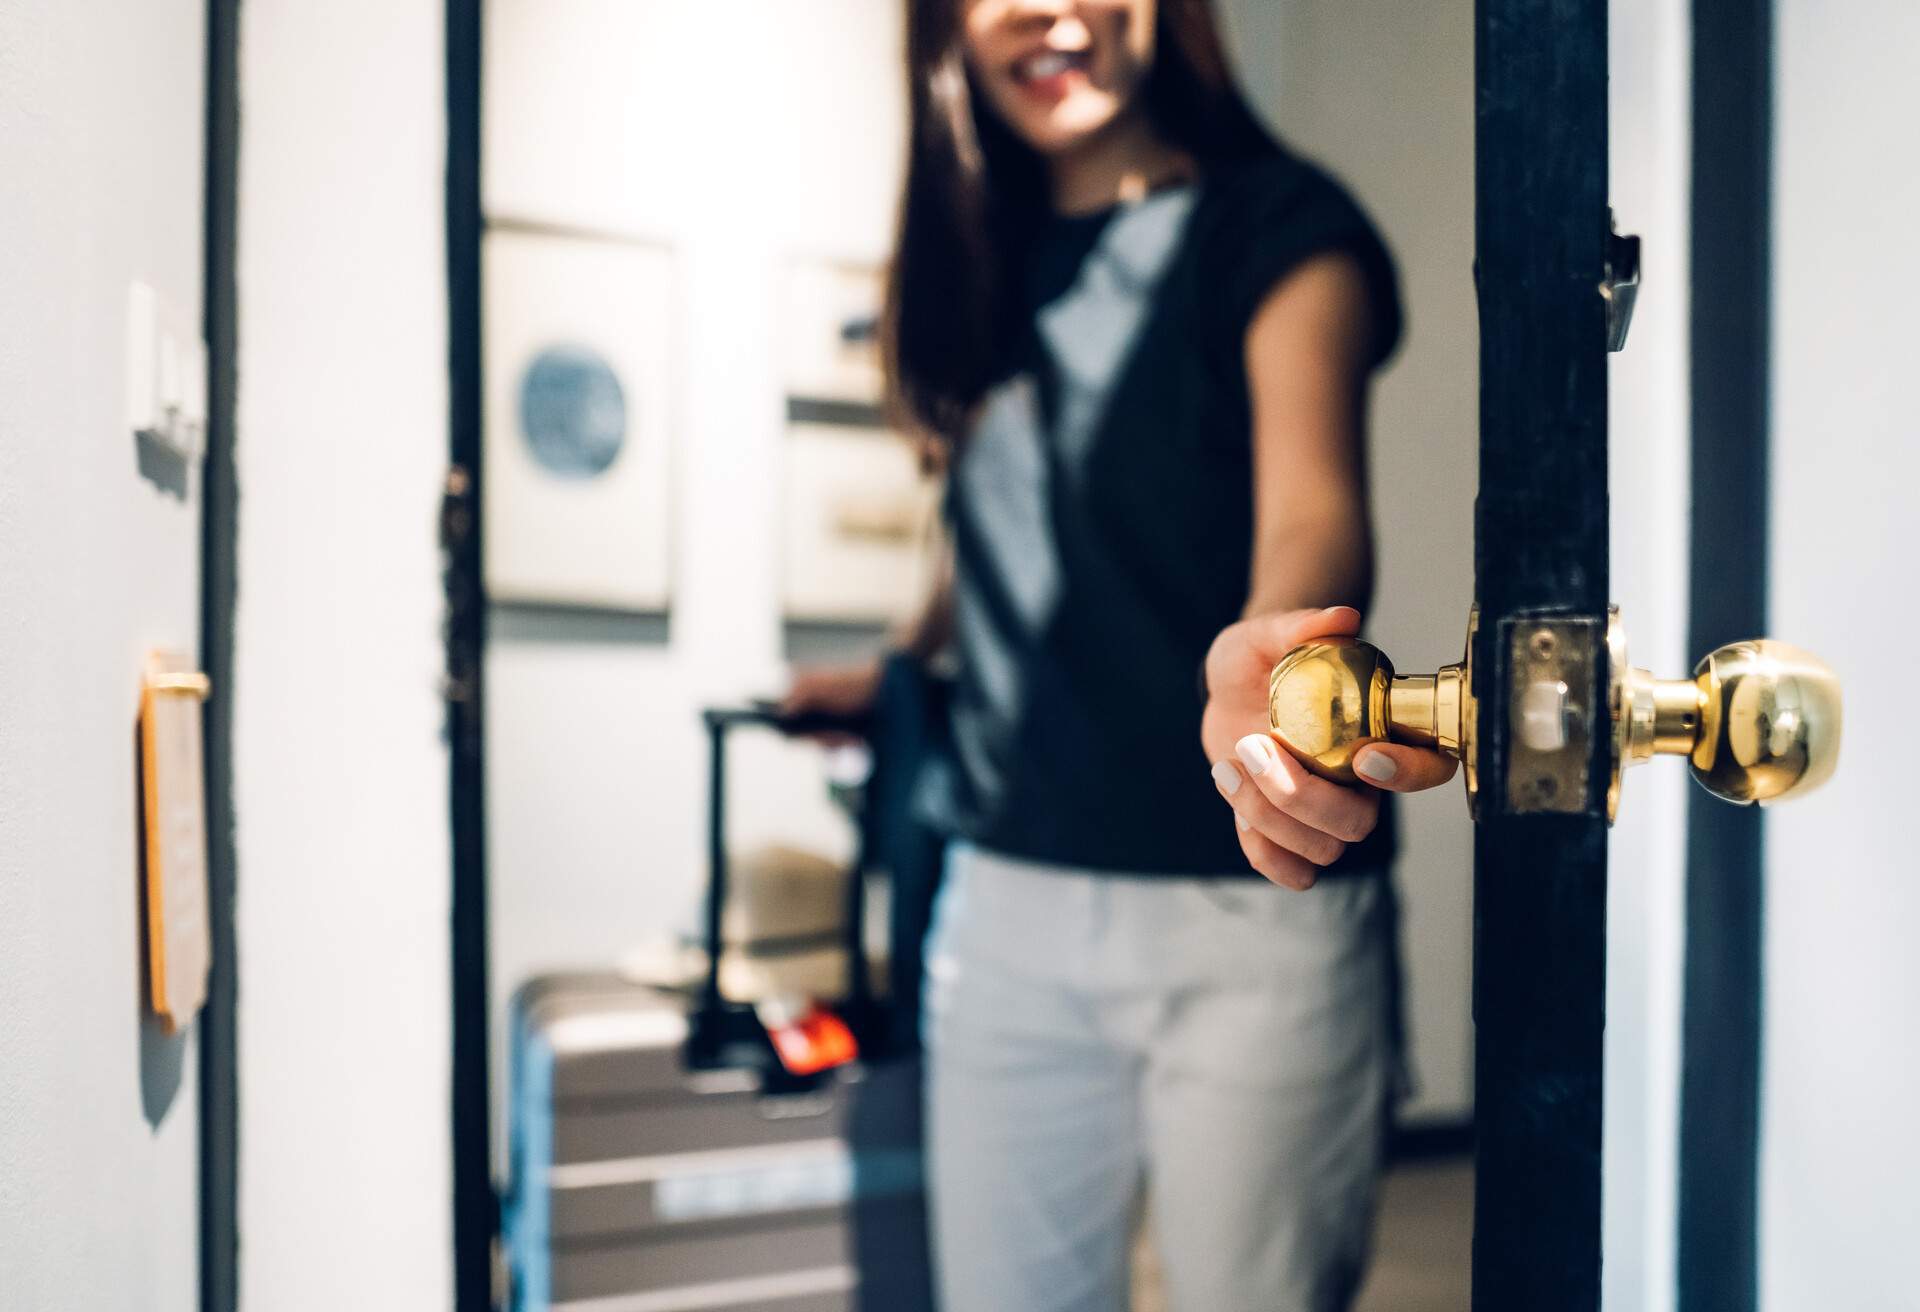 A woman in a black shirt opens a room while grabbing the door knob.